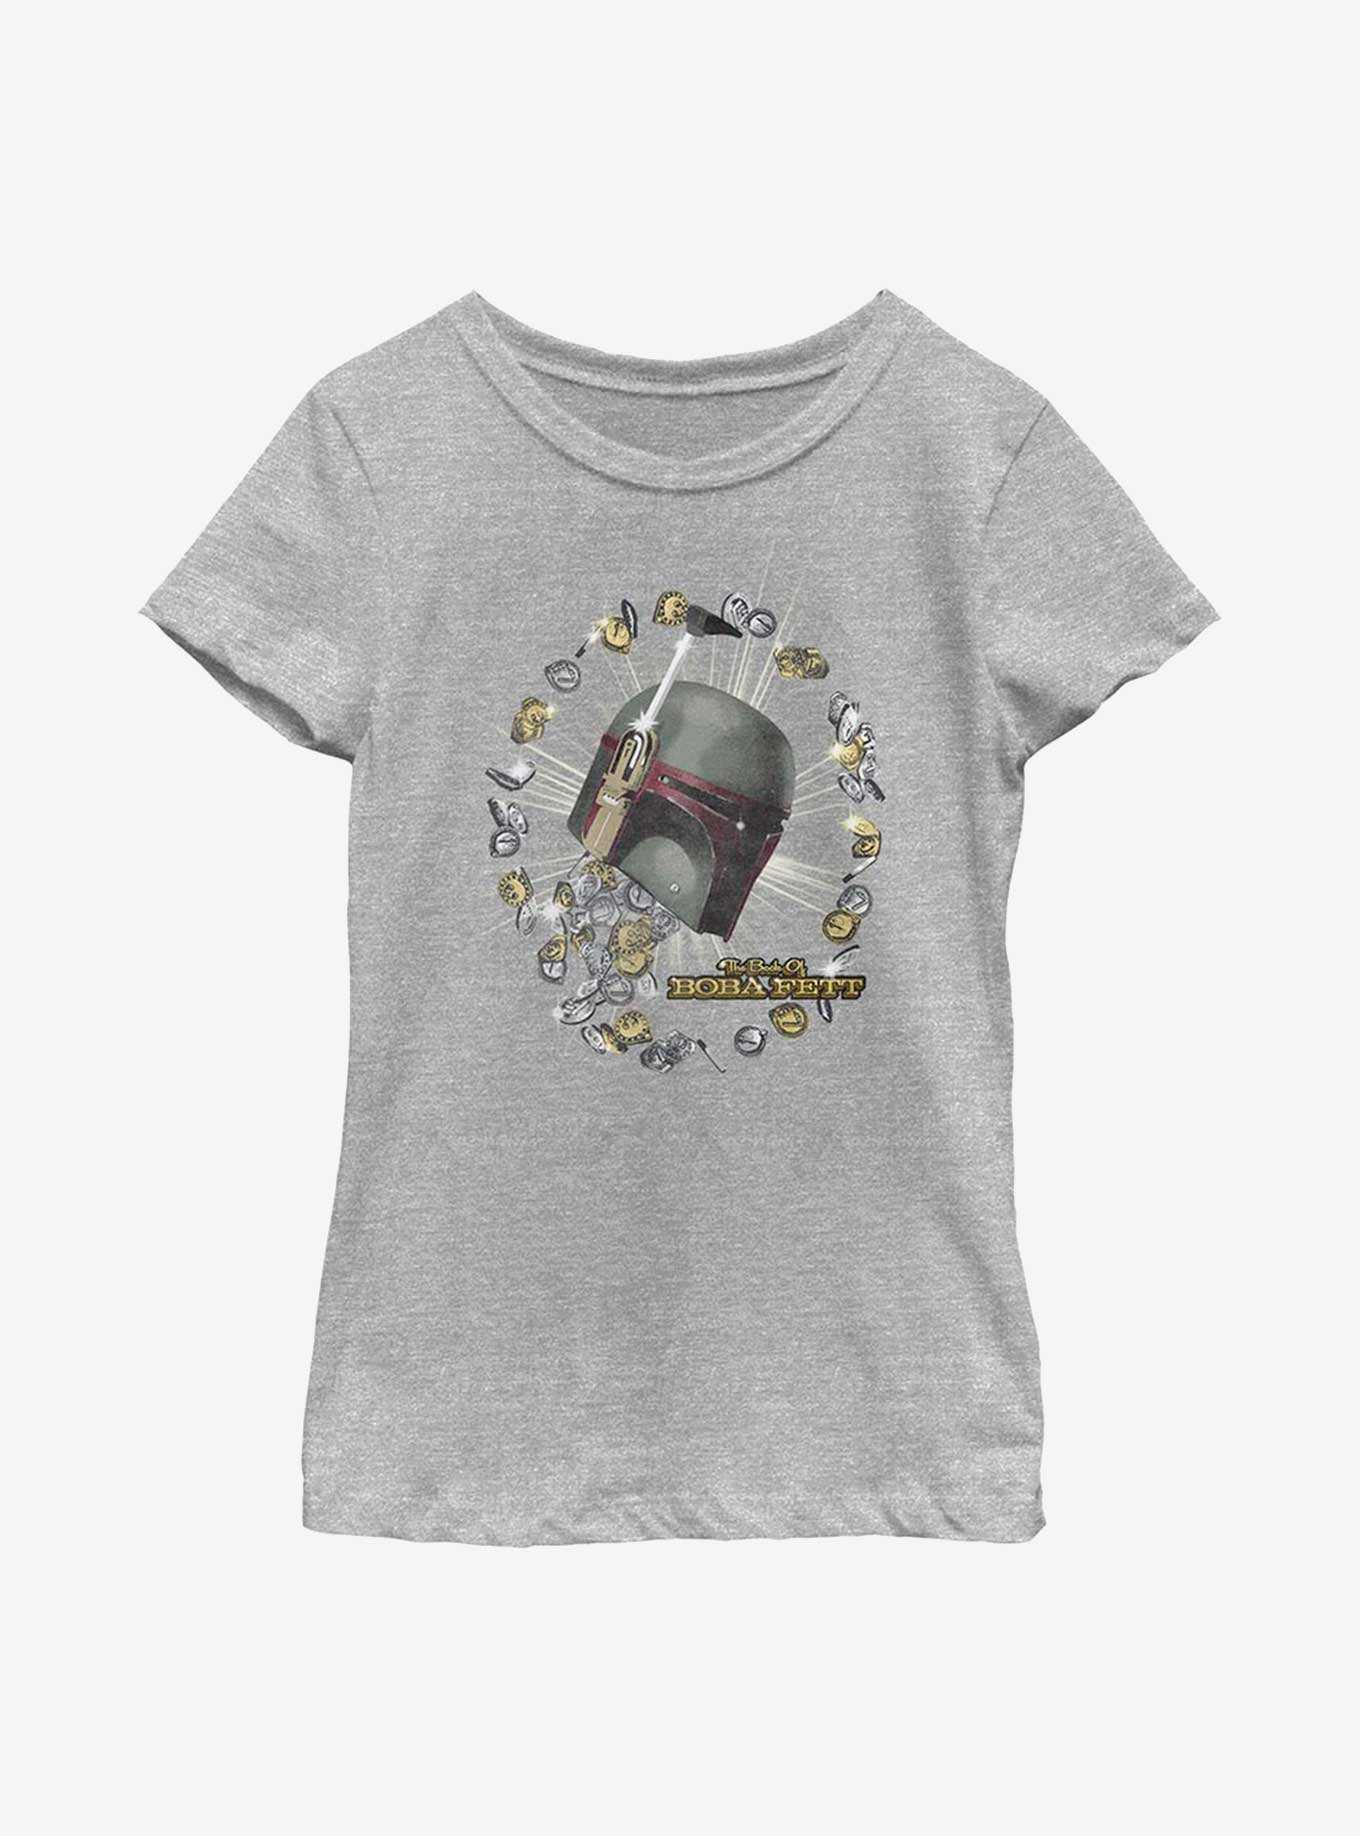 Star Wars The Book Of Boba Fett All About Credits Youth Girls T-Shirt, , hi-res